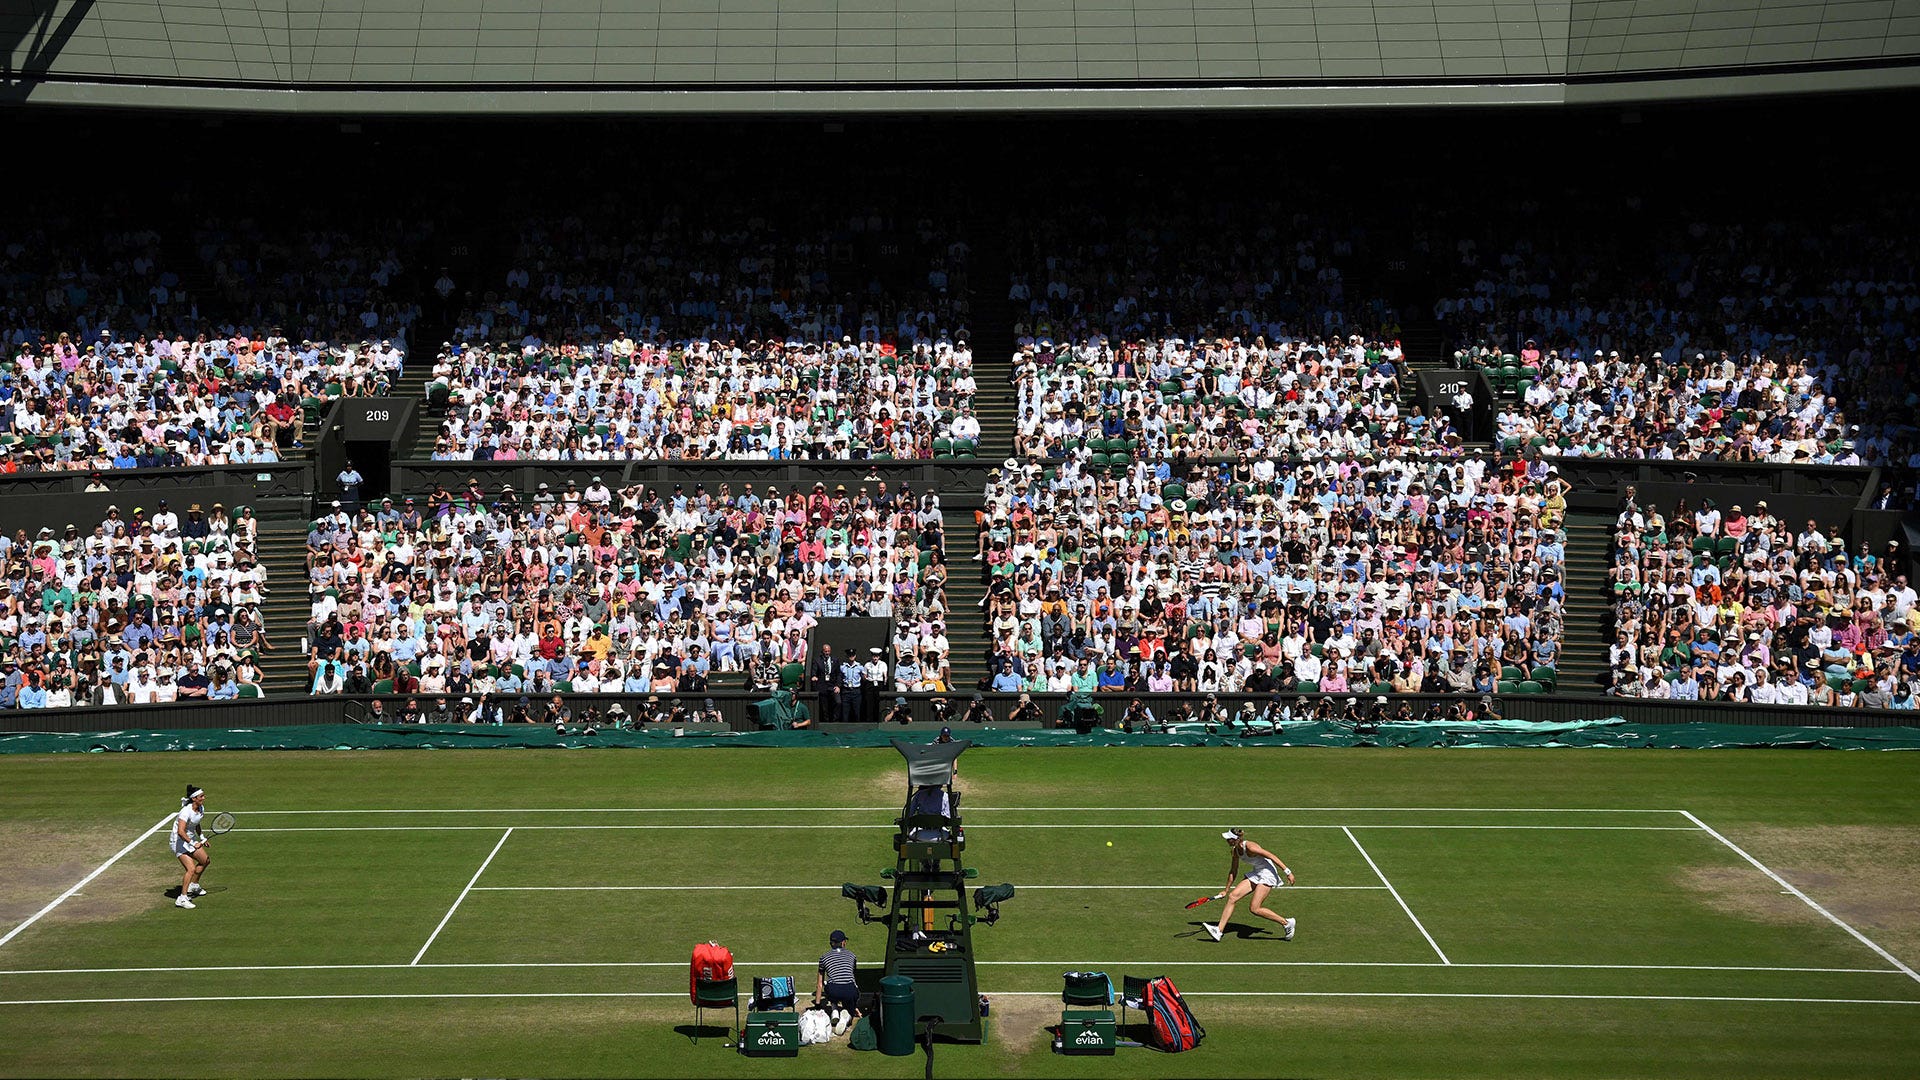 Wimbledon tickets prices, package deals, resales and more Goal